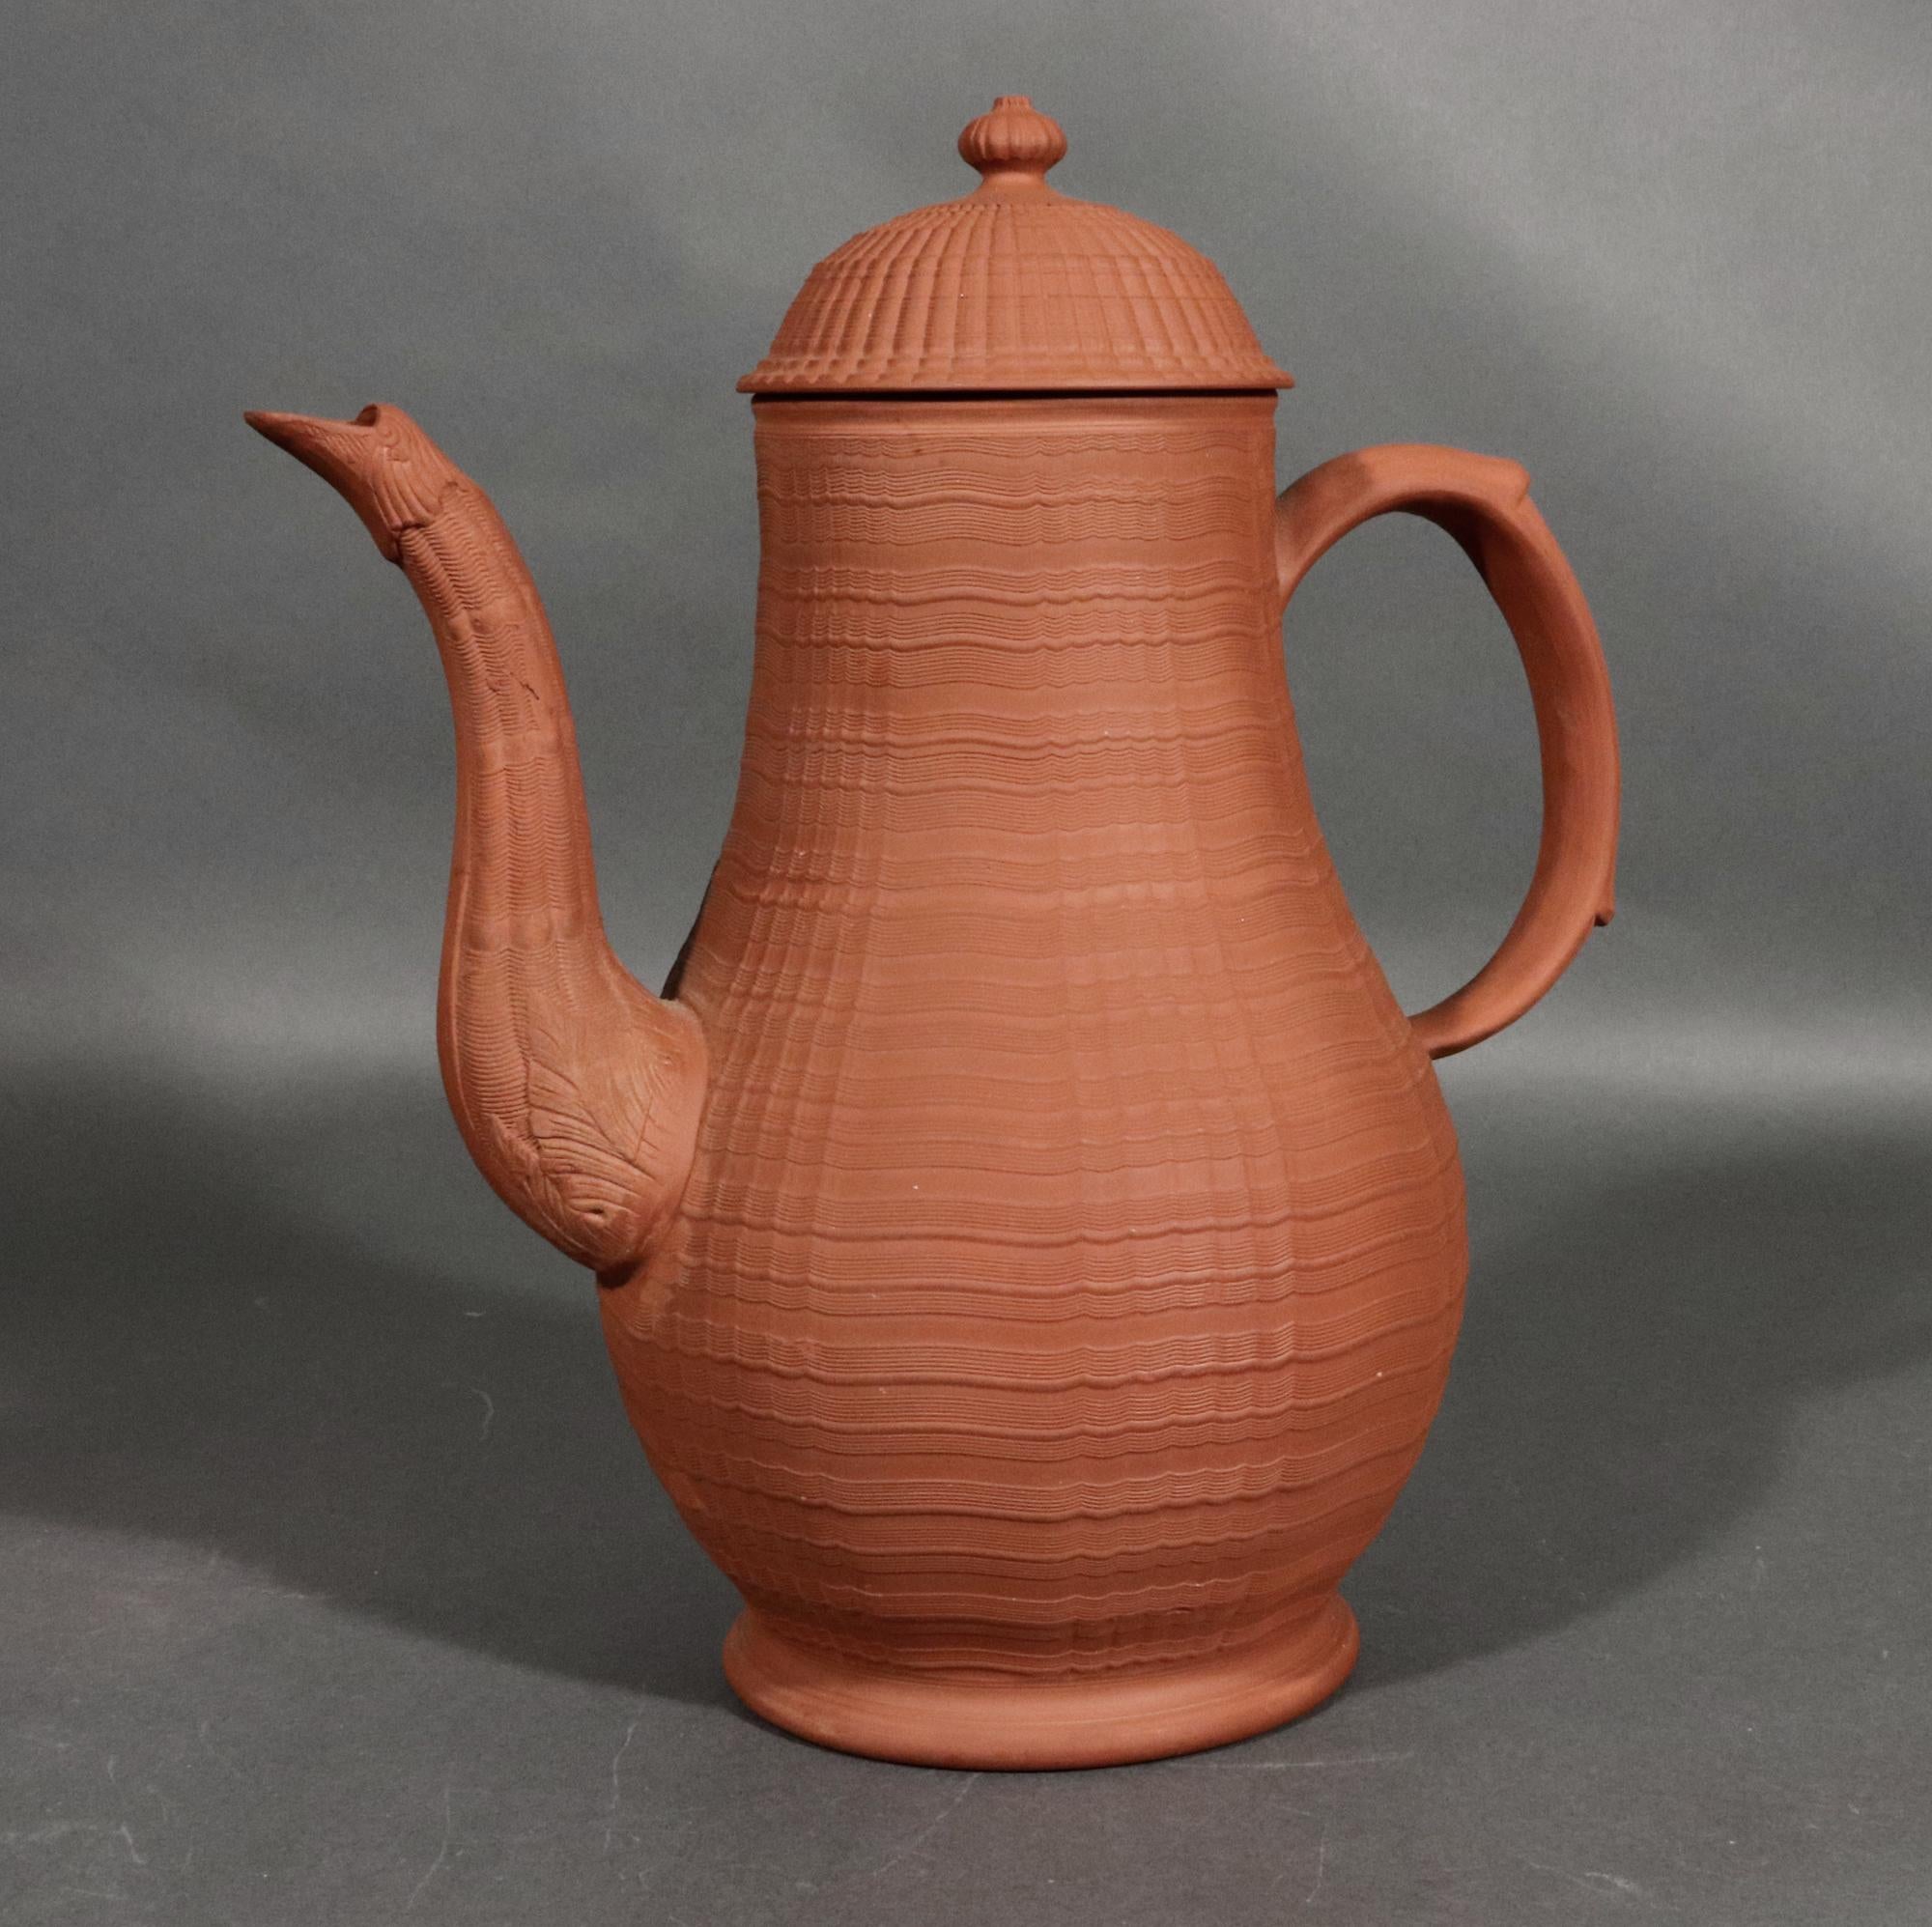 English Stoneware Pottery Redware Stoneware Engine Turned Coffeepot,
Staffordshire,
Circa 1765

A Staffordshire redware stoneware coffeepot and cover with an engine-turned body and cover. The cover with an acorn finial.  The spout in the form of a